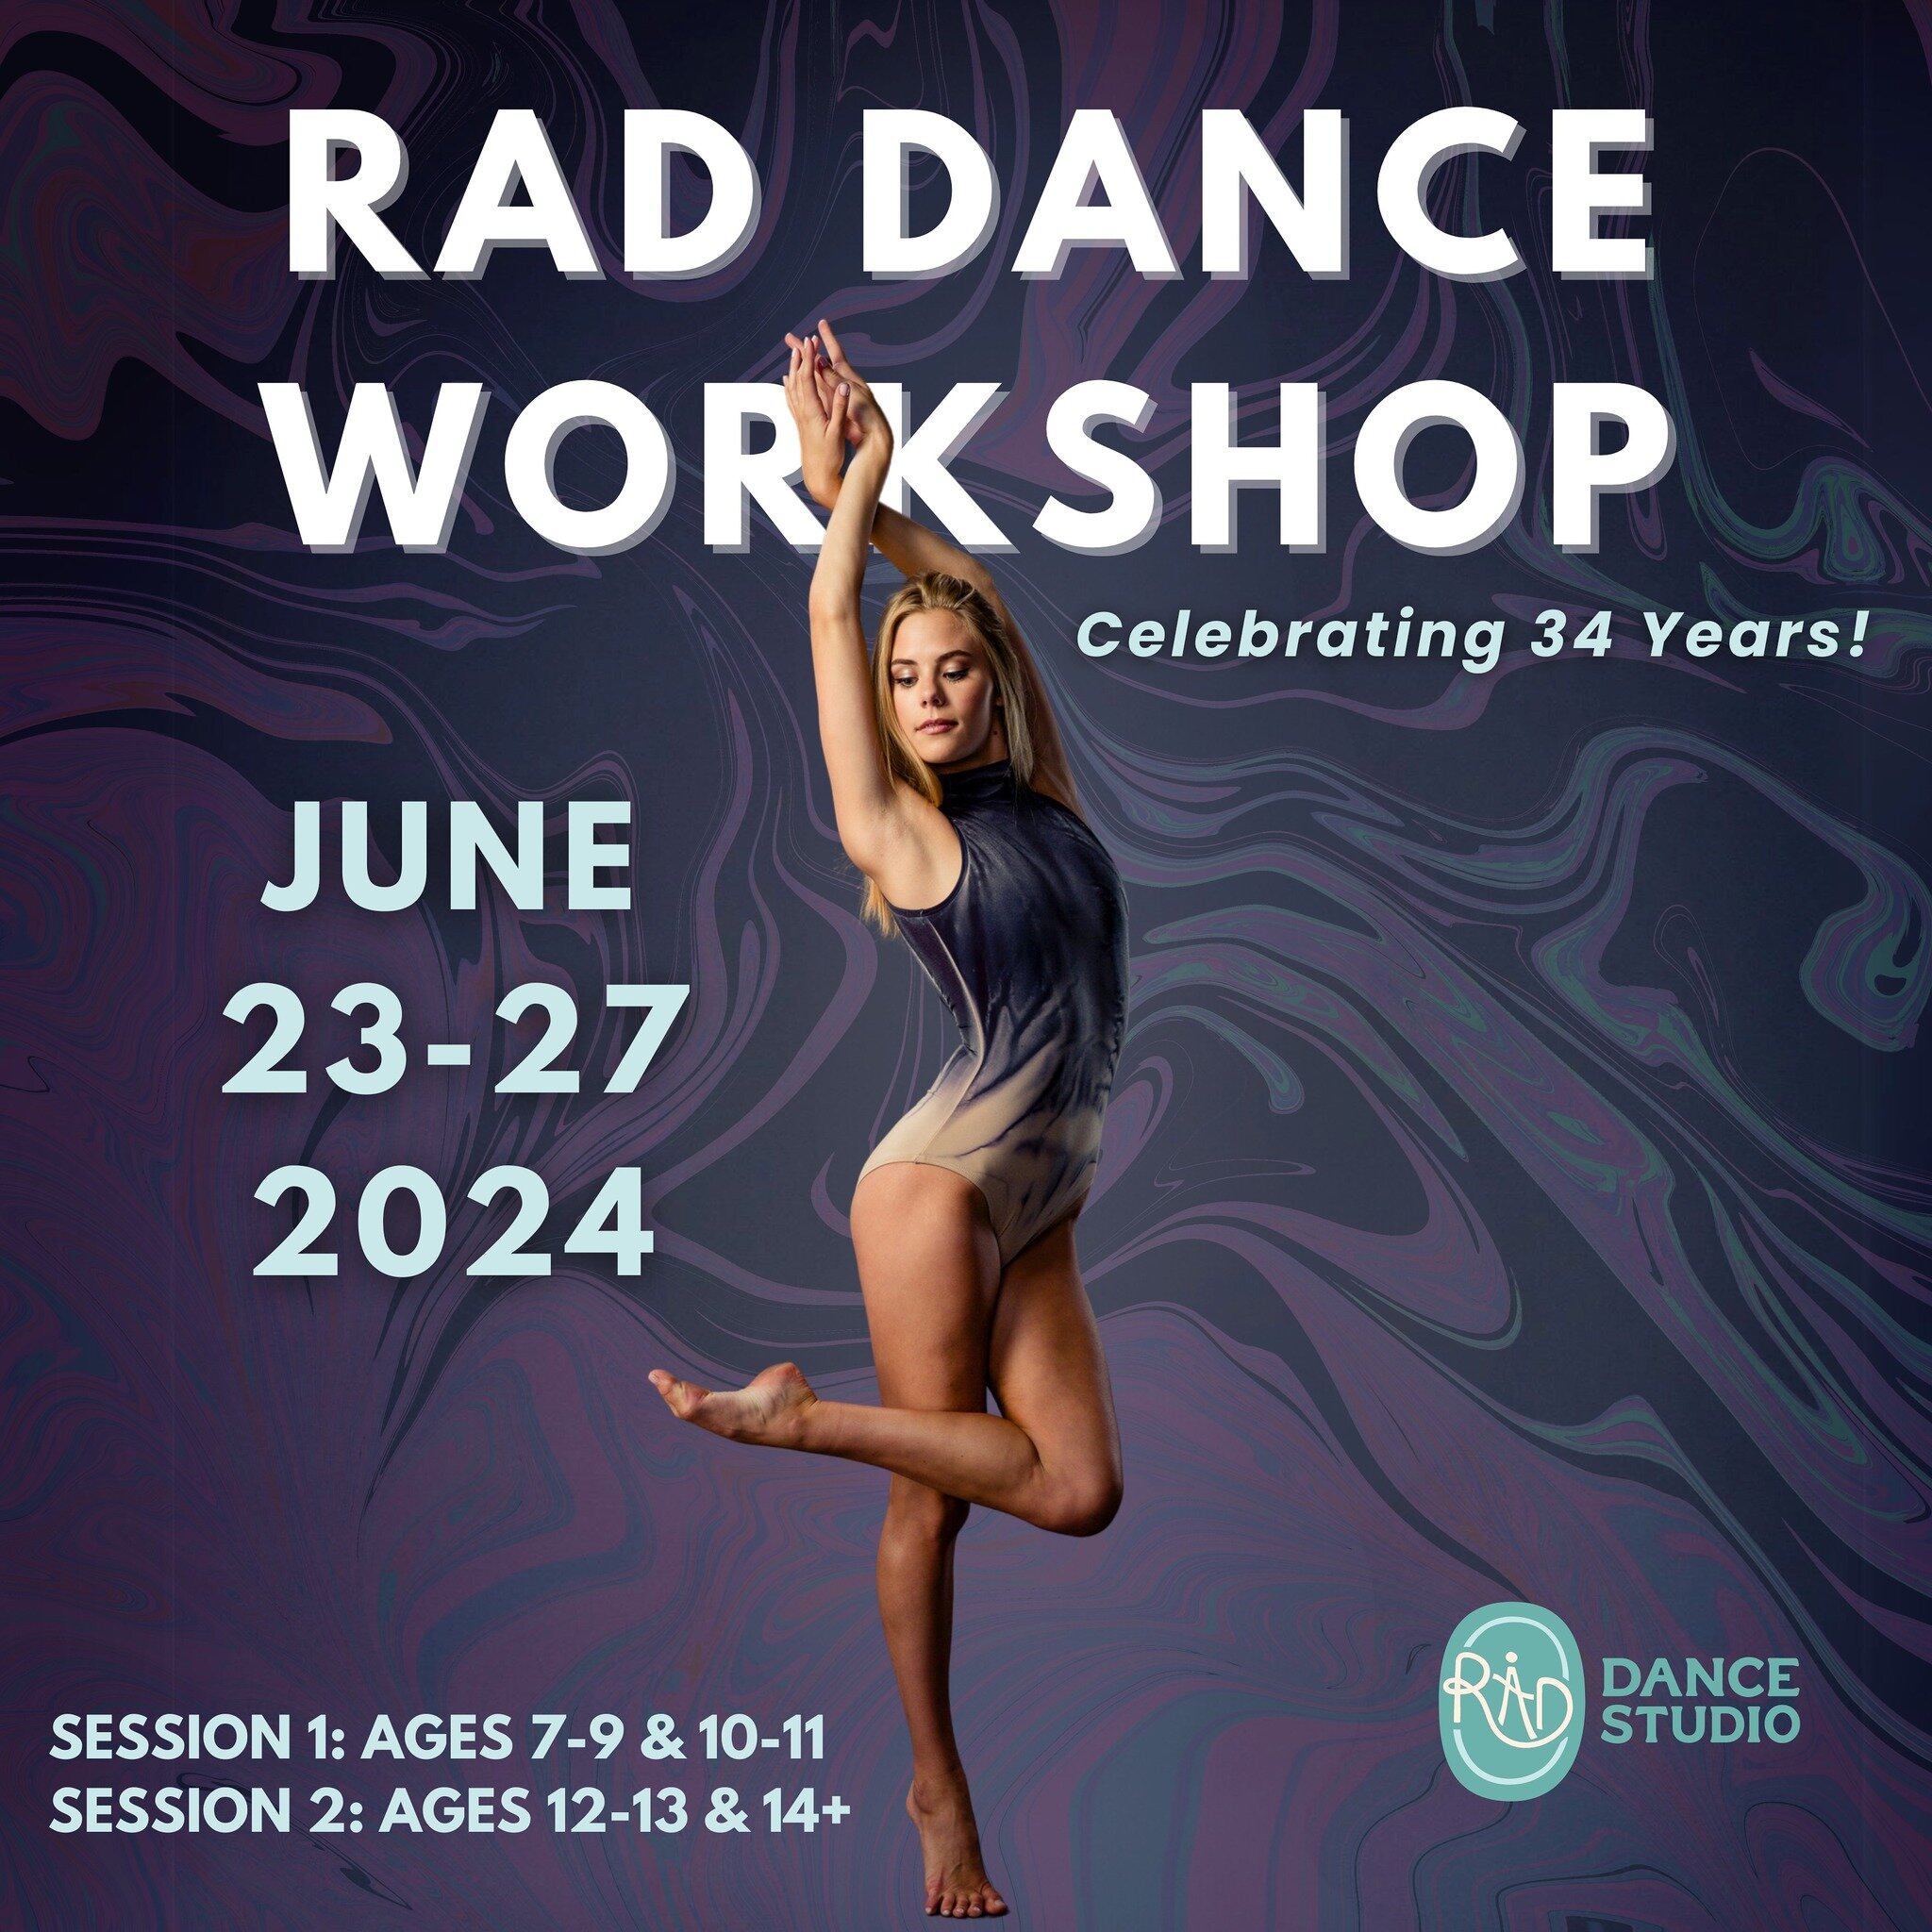 🚨 Looking for a summer intensive that will challenge you, inspire you, &amp; fill you with the love of dance? Look no further! 

🌟 Join us as we kick off RAD&rsquo;s 34th Anniversary Season with our annual RAD DANCE WORKSHOP! 

😍 REGISTRATION NOW 